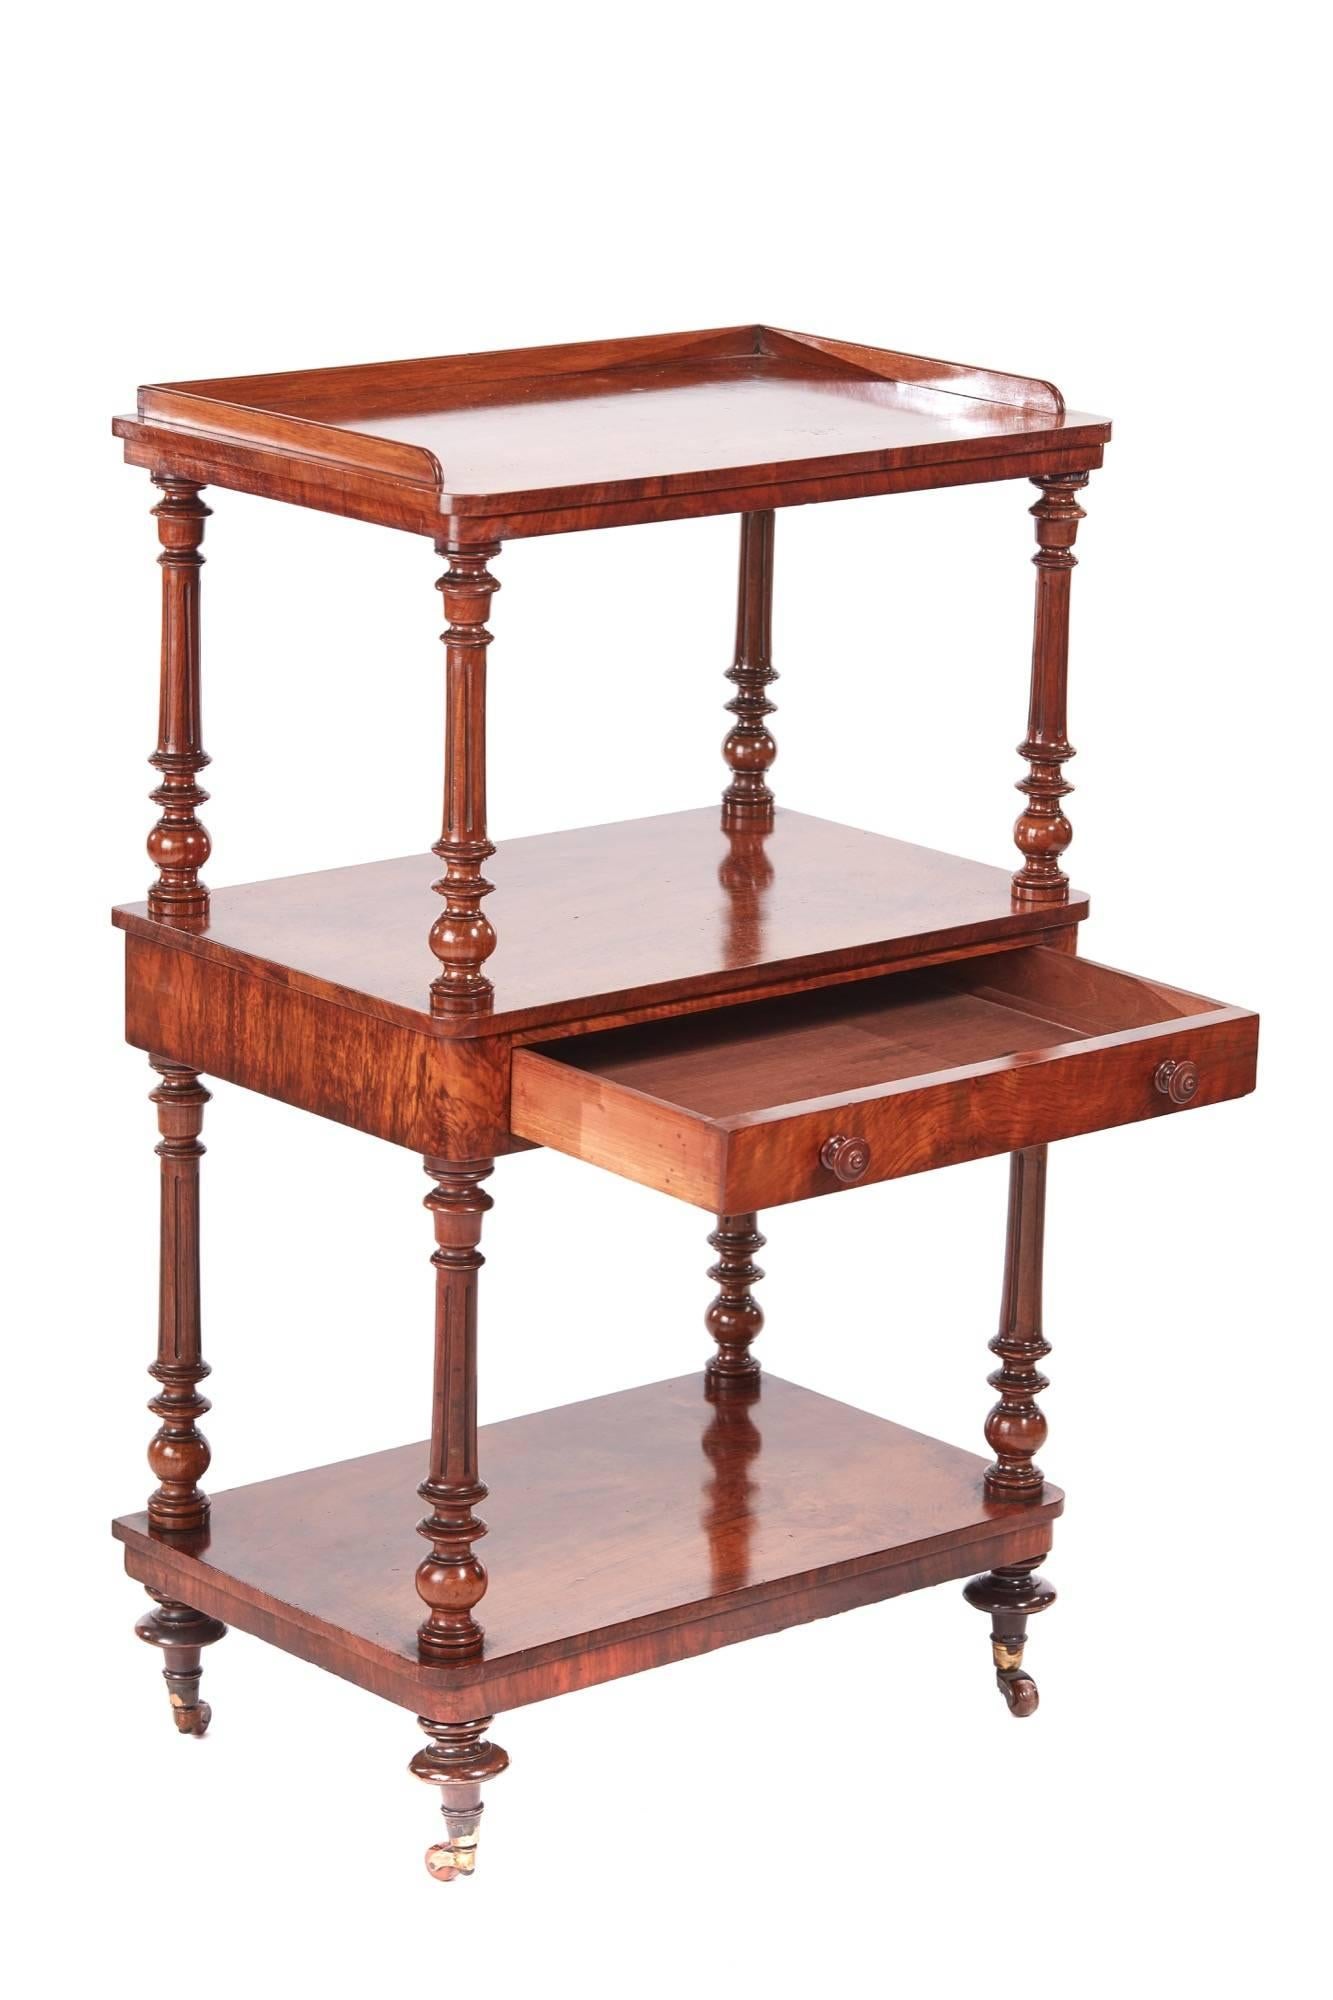 Quality victorian burr walnut three-tier whatnot, with three lovely burr walnut tiers and a gallery top, one drawer to the centre with original turned walnut knobs, supported by fluted turned uprights and turned feet, original castors
Fantastic